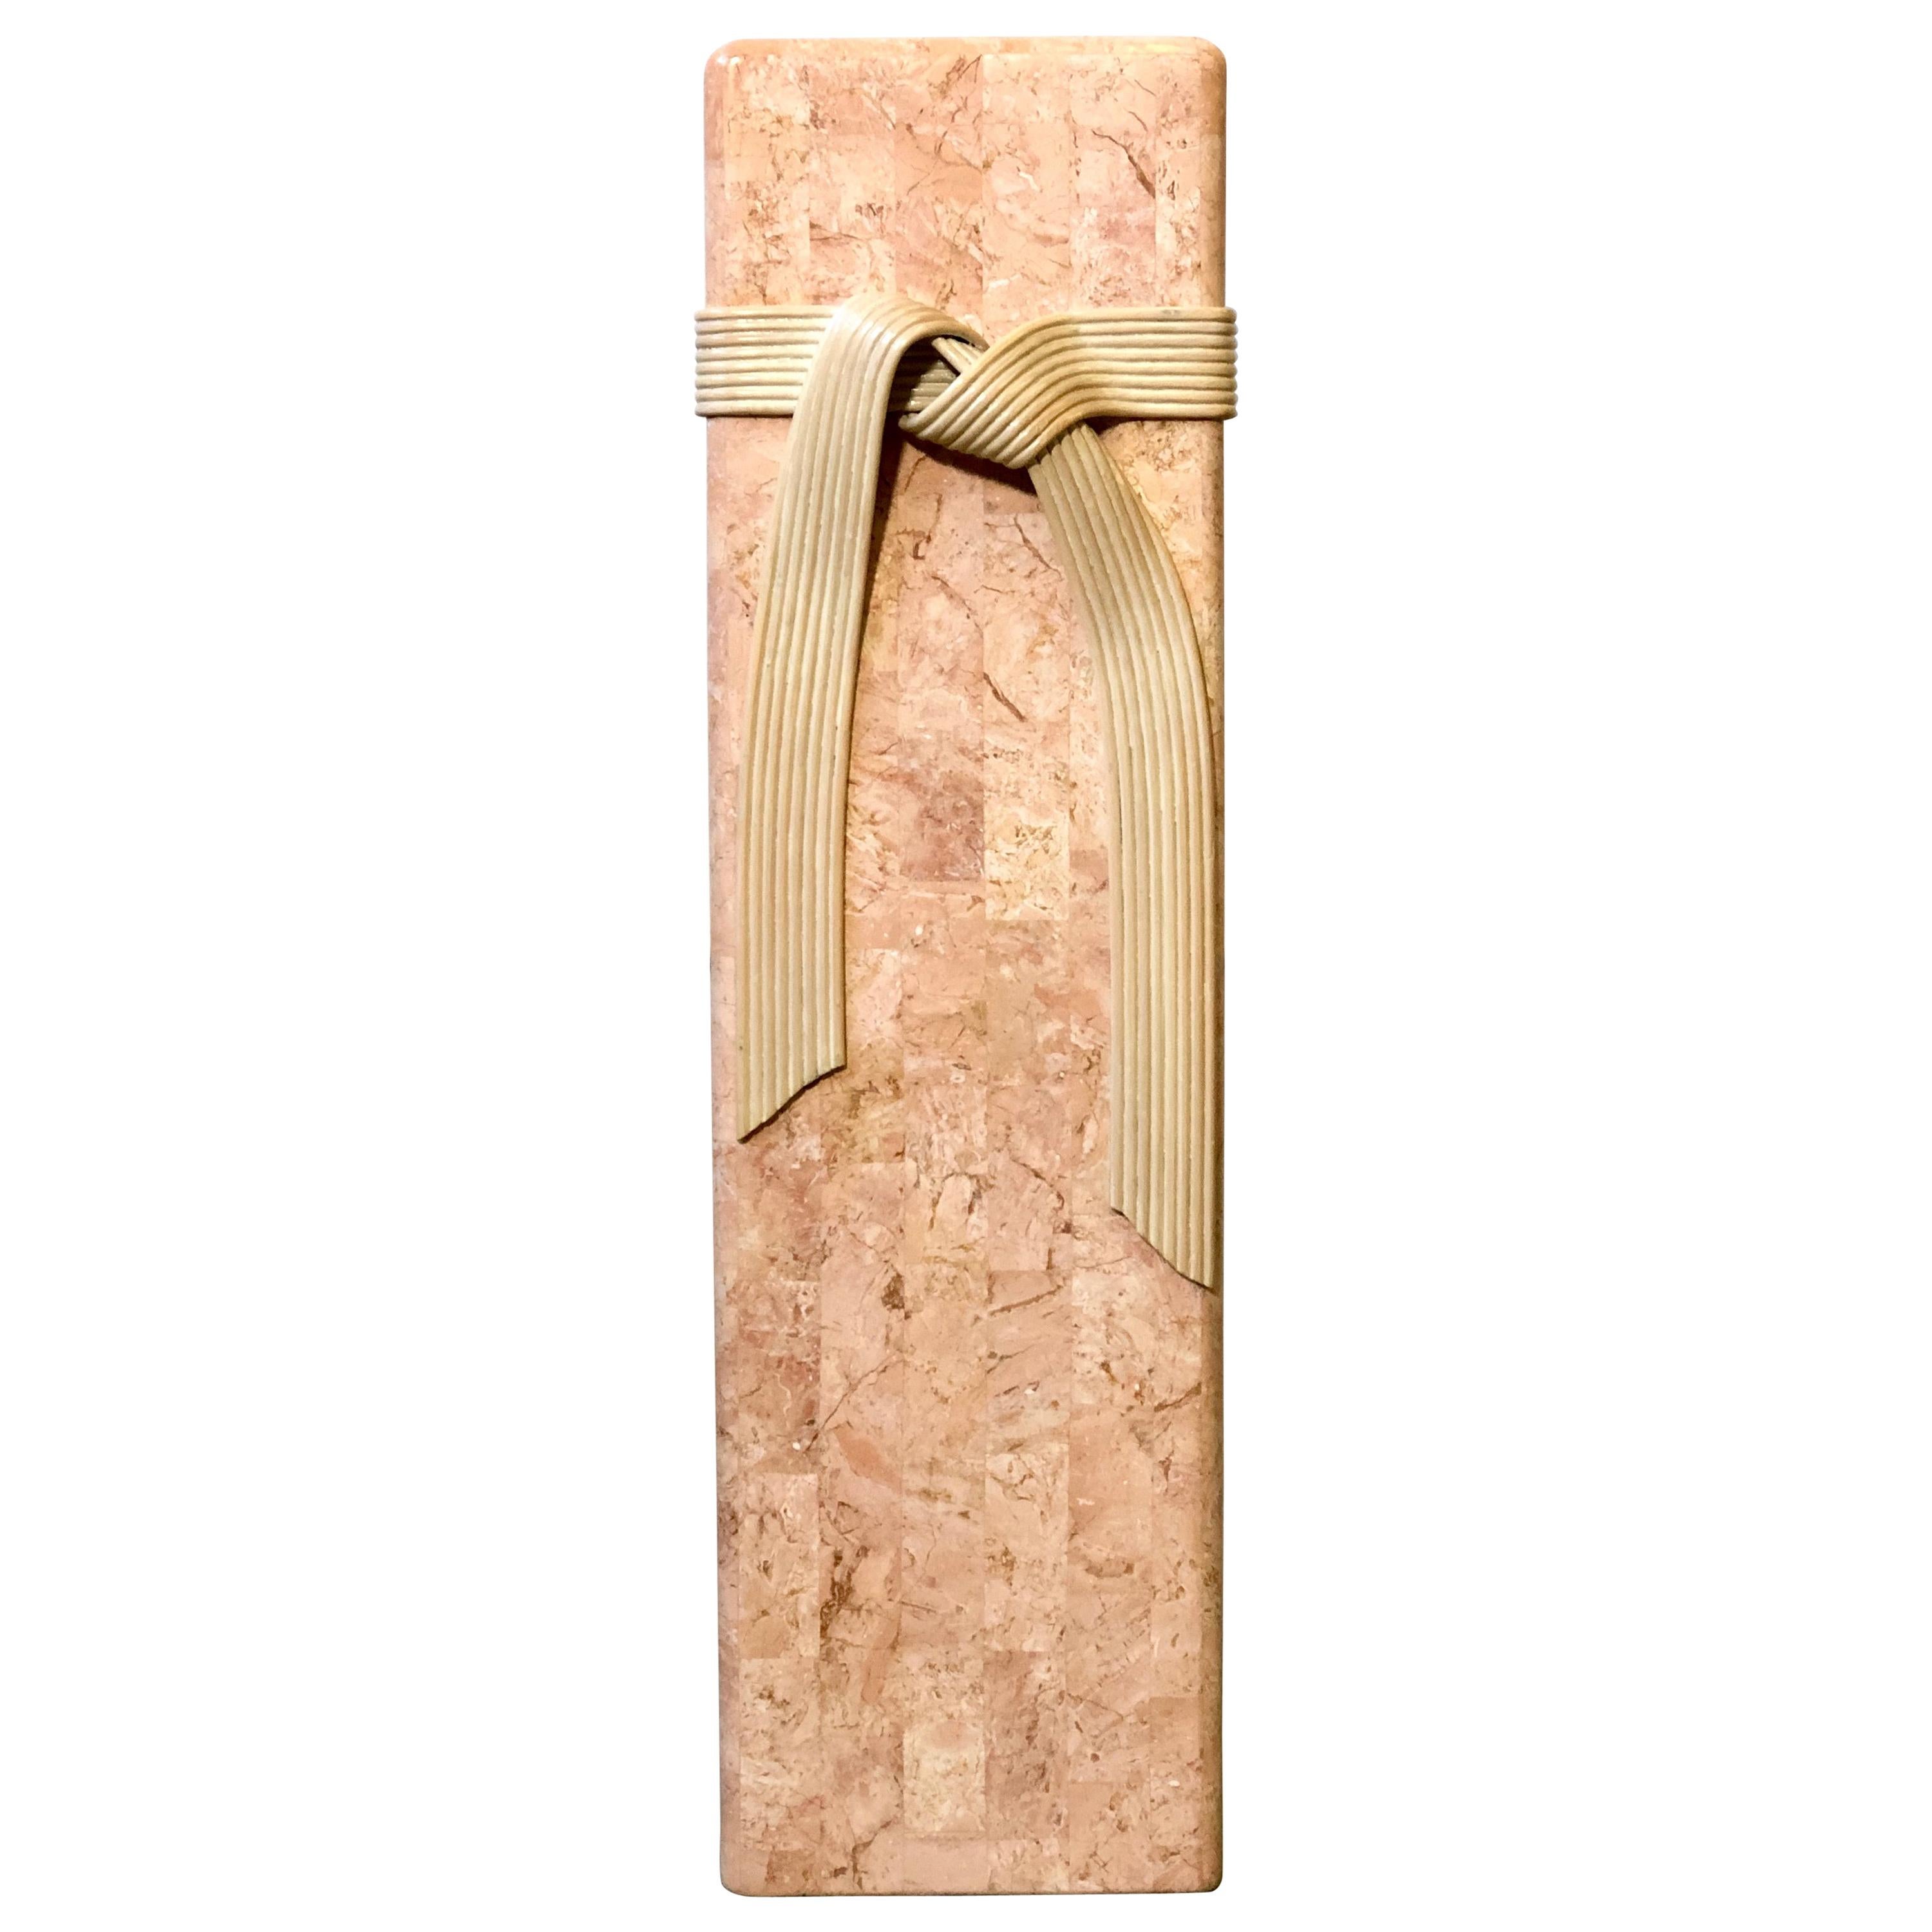 Pink Tessellated Stone Pedestal with Rattan Ribbon Tie